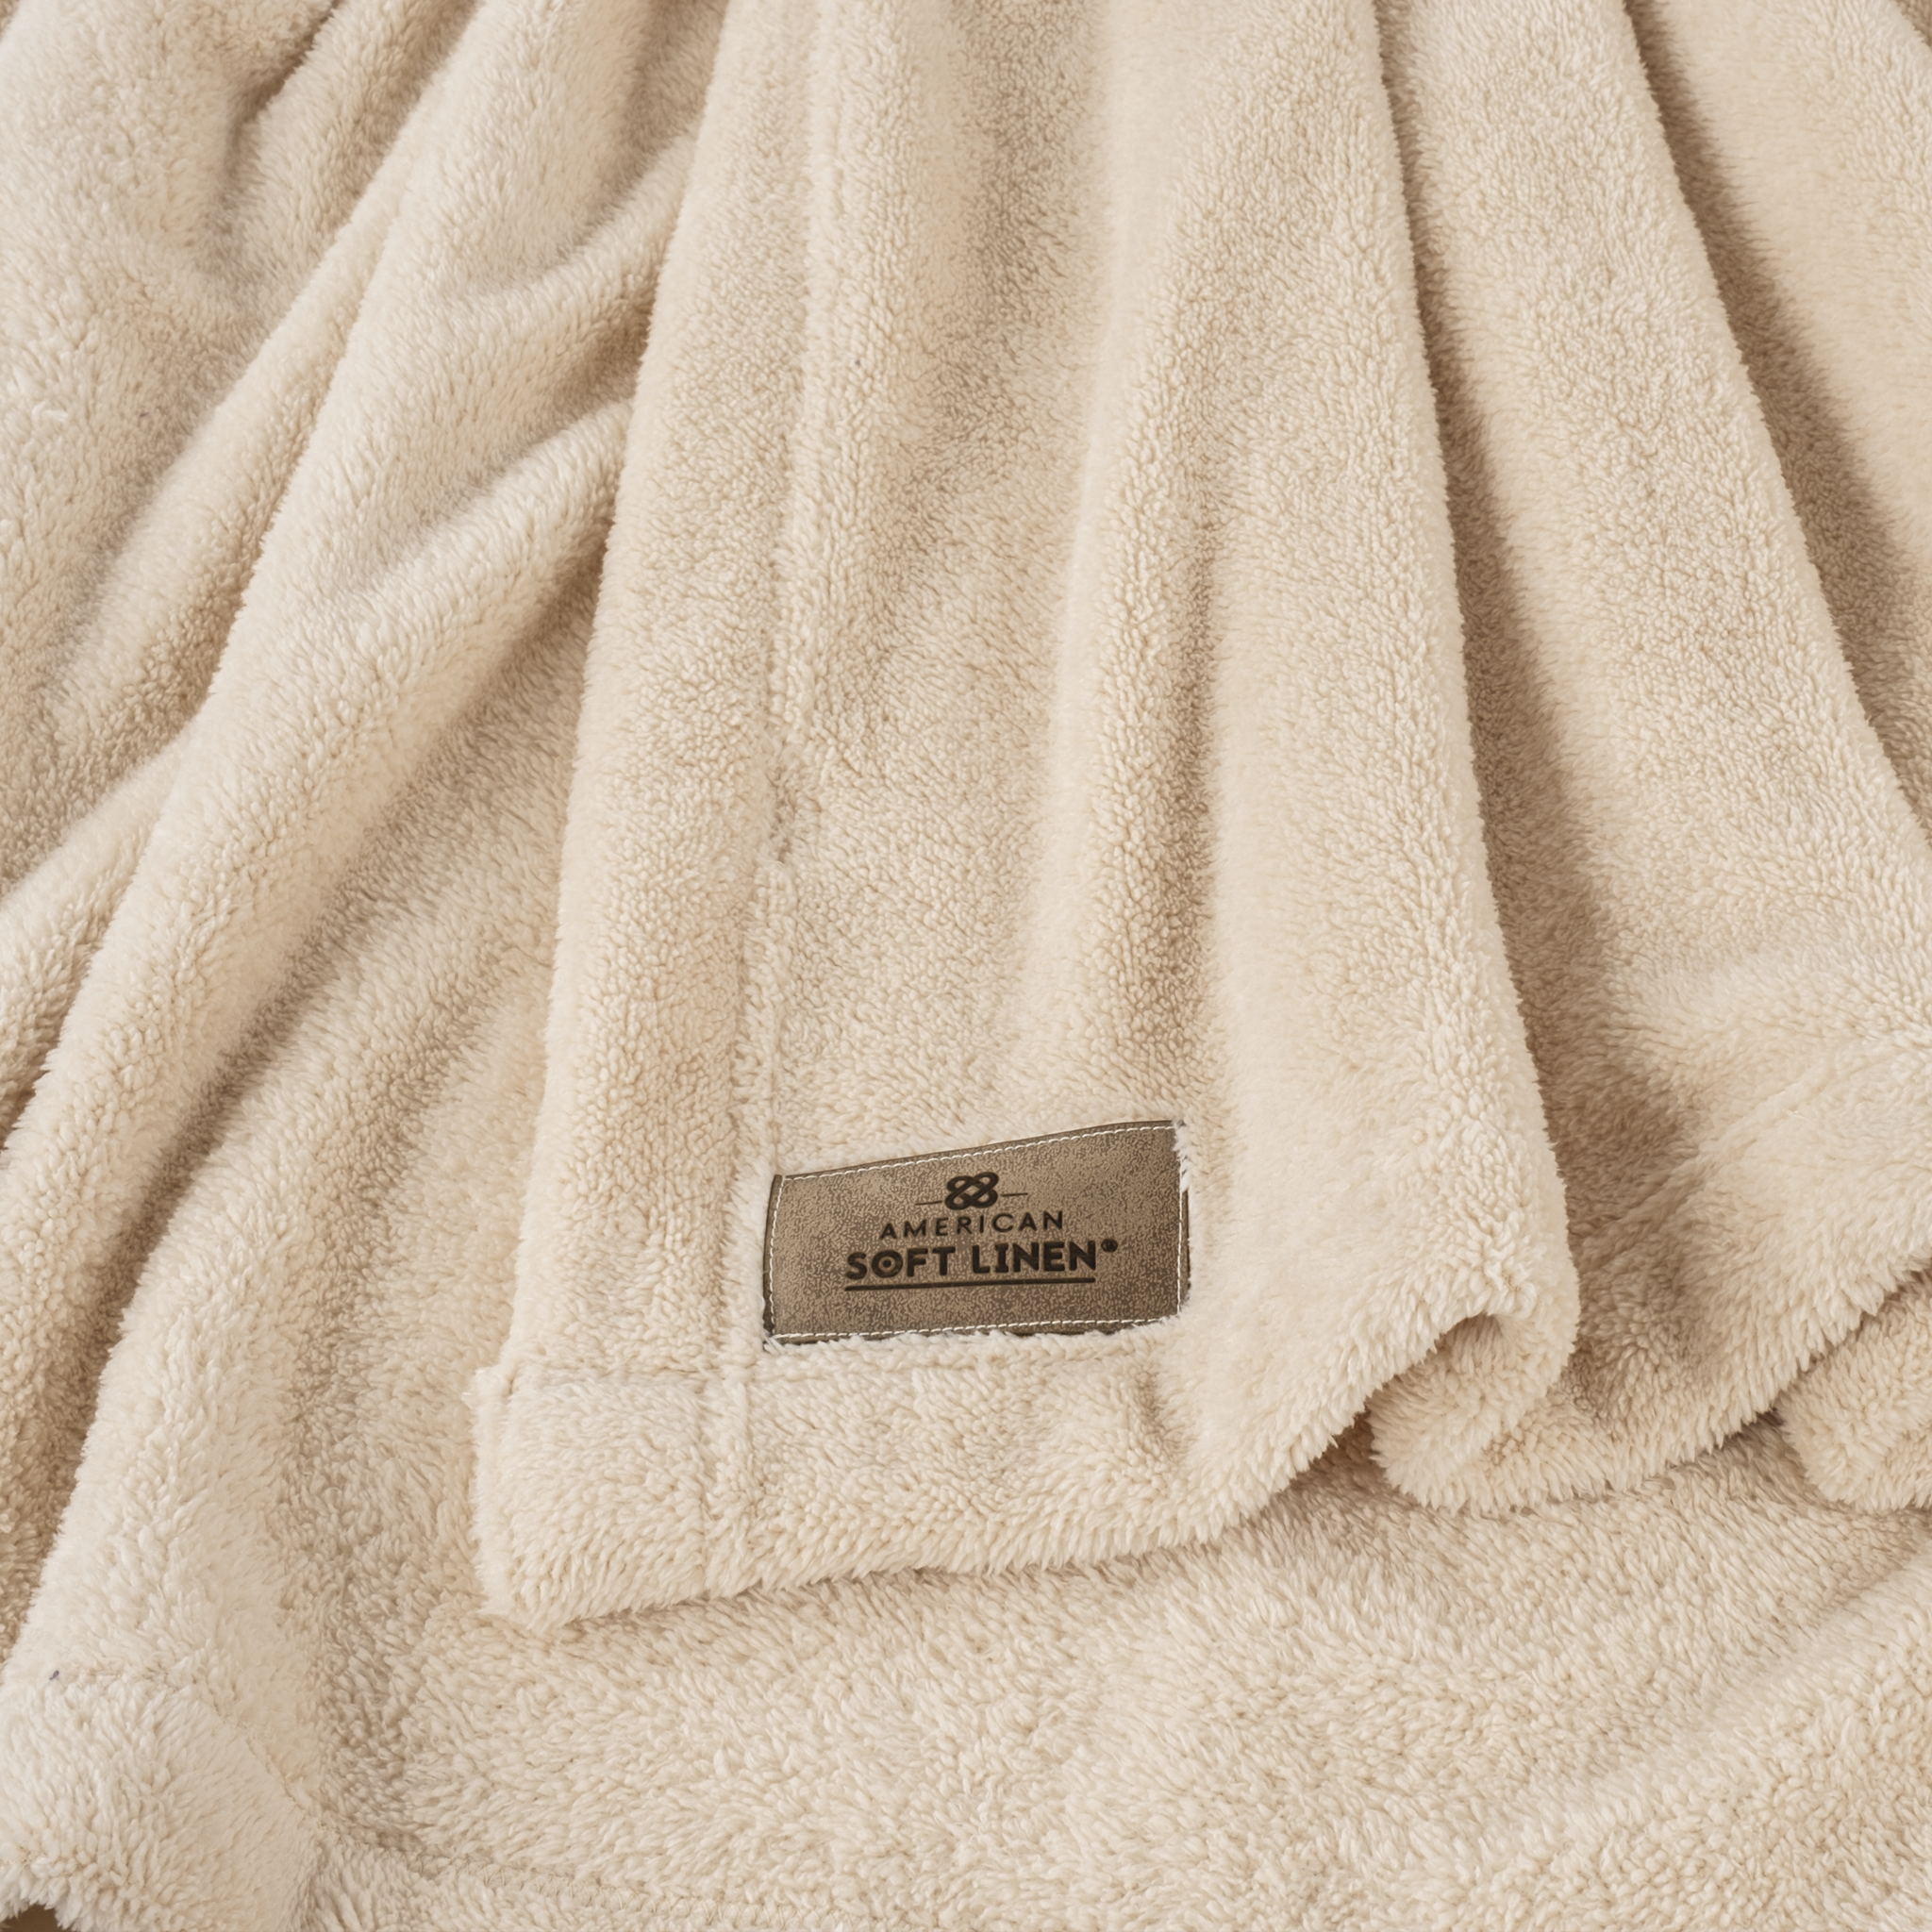 American Soft Linen - Bedding Fleece Blanket - Wholesale - 9 Set Case Pack - Queen Size 85x90 inches - Sand-Taupe - 4